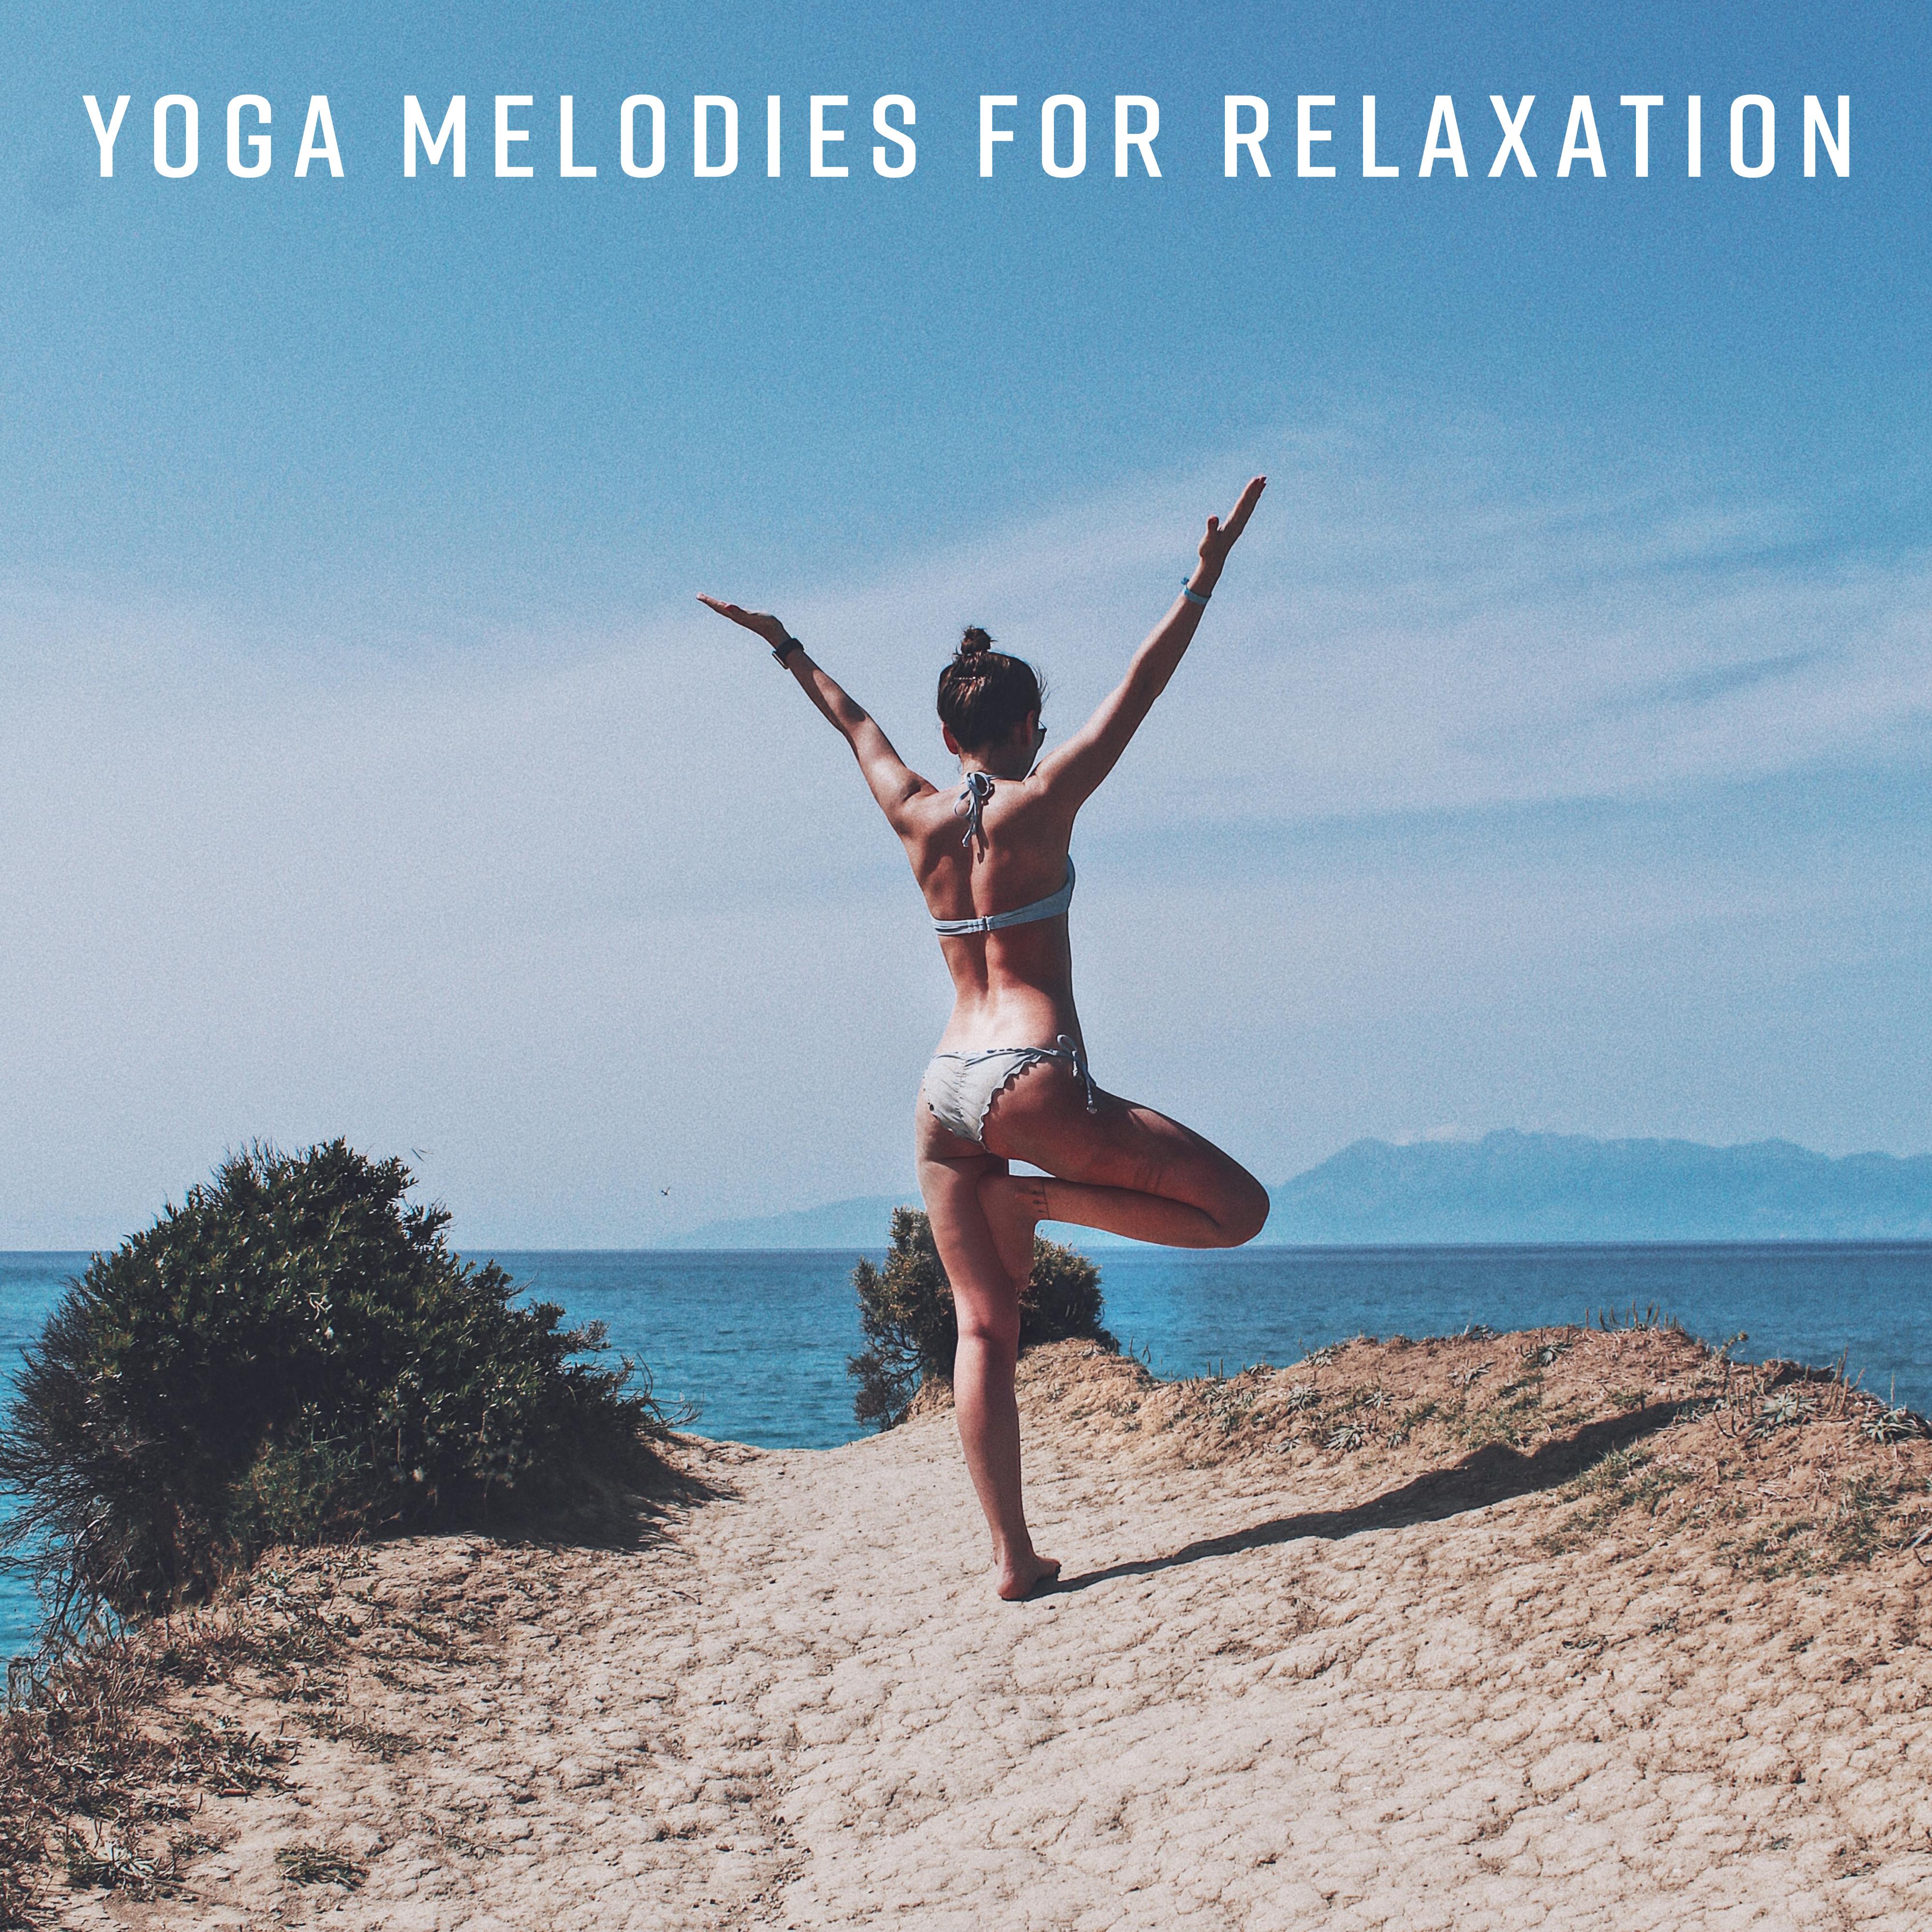 Yoga Melodies for Relaxation